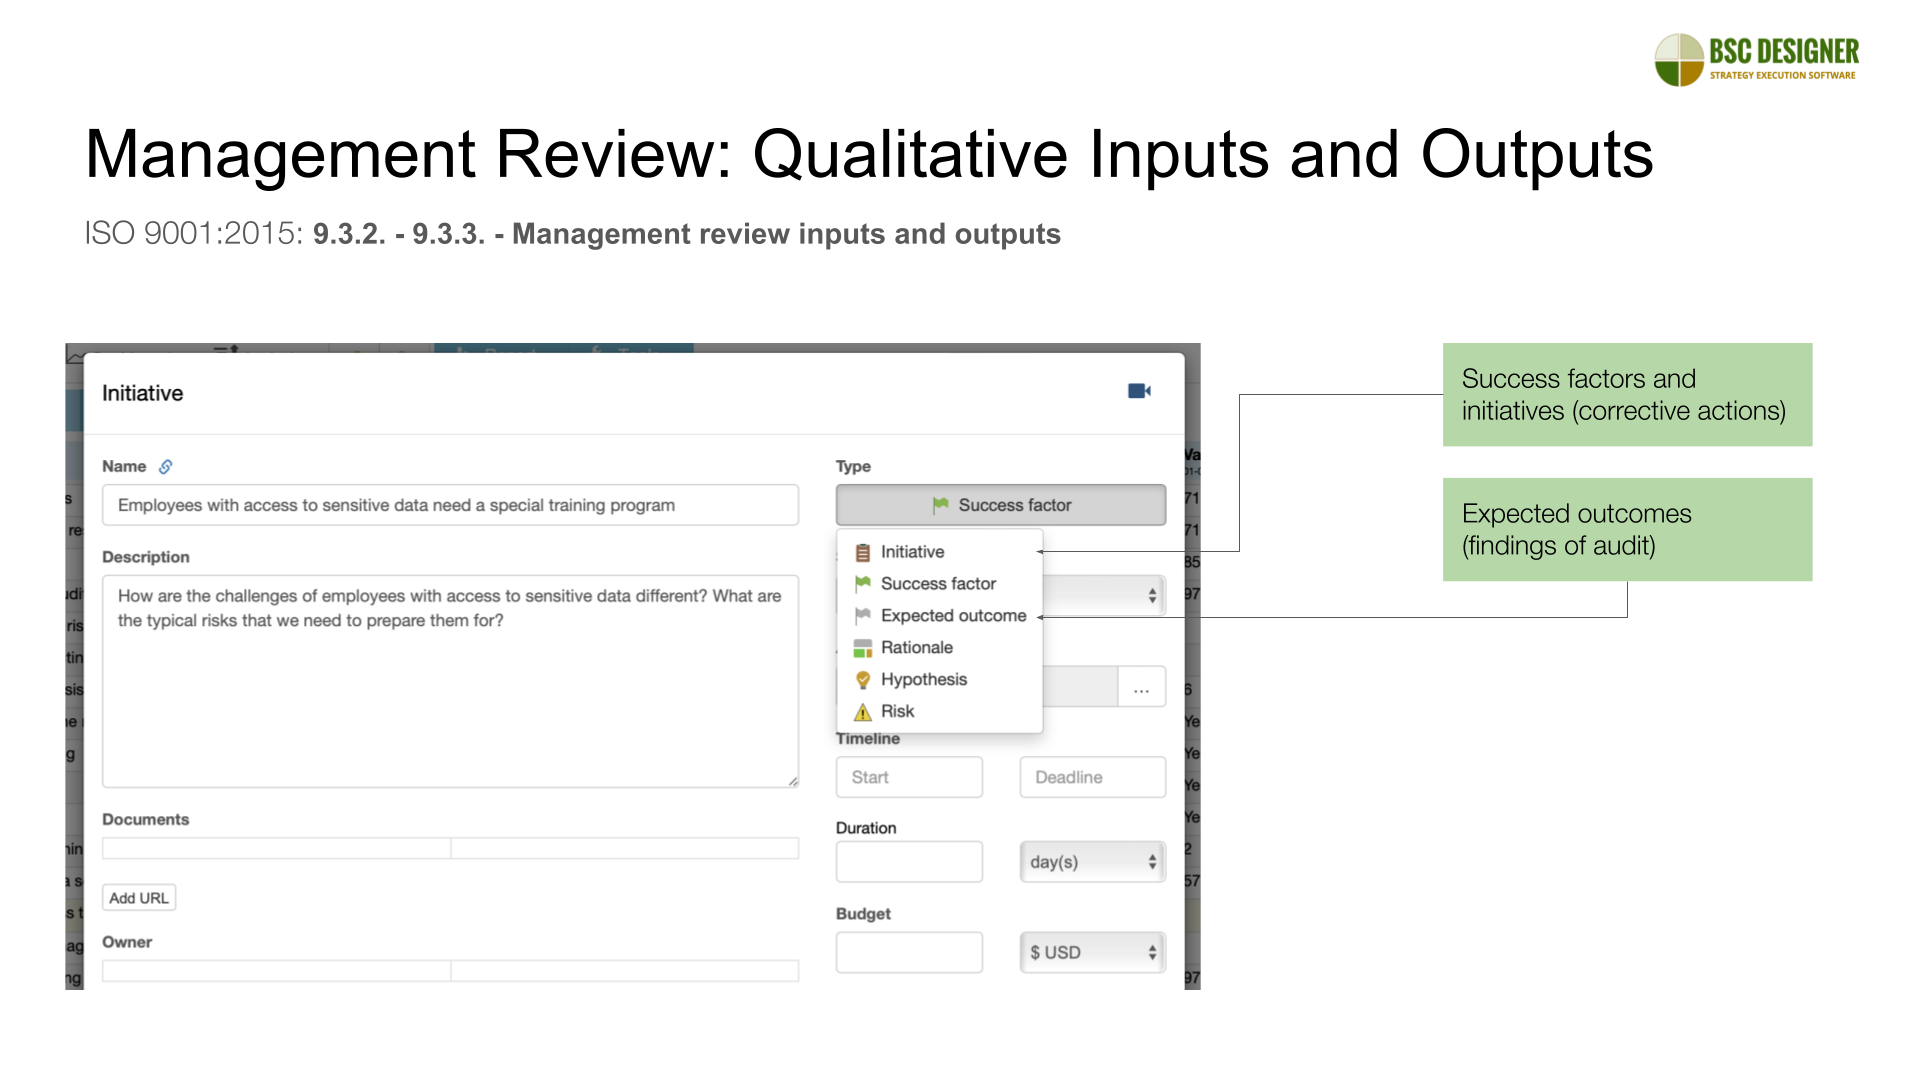 Management Review: Qualitative Inputs and Outputs - ISO 9001:2015: 9.3.2. - 9.3.3.